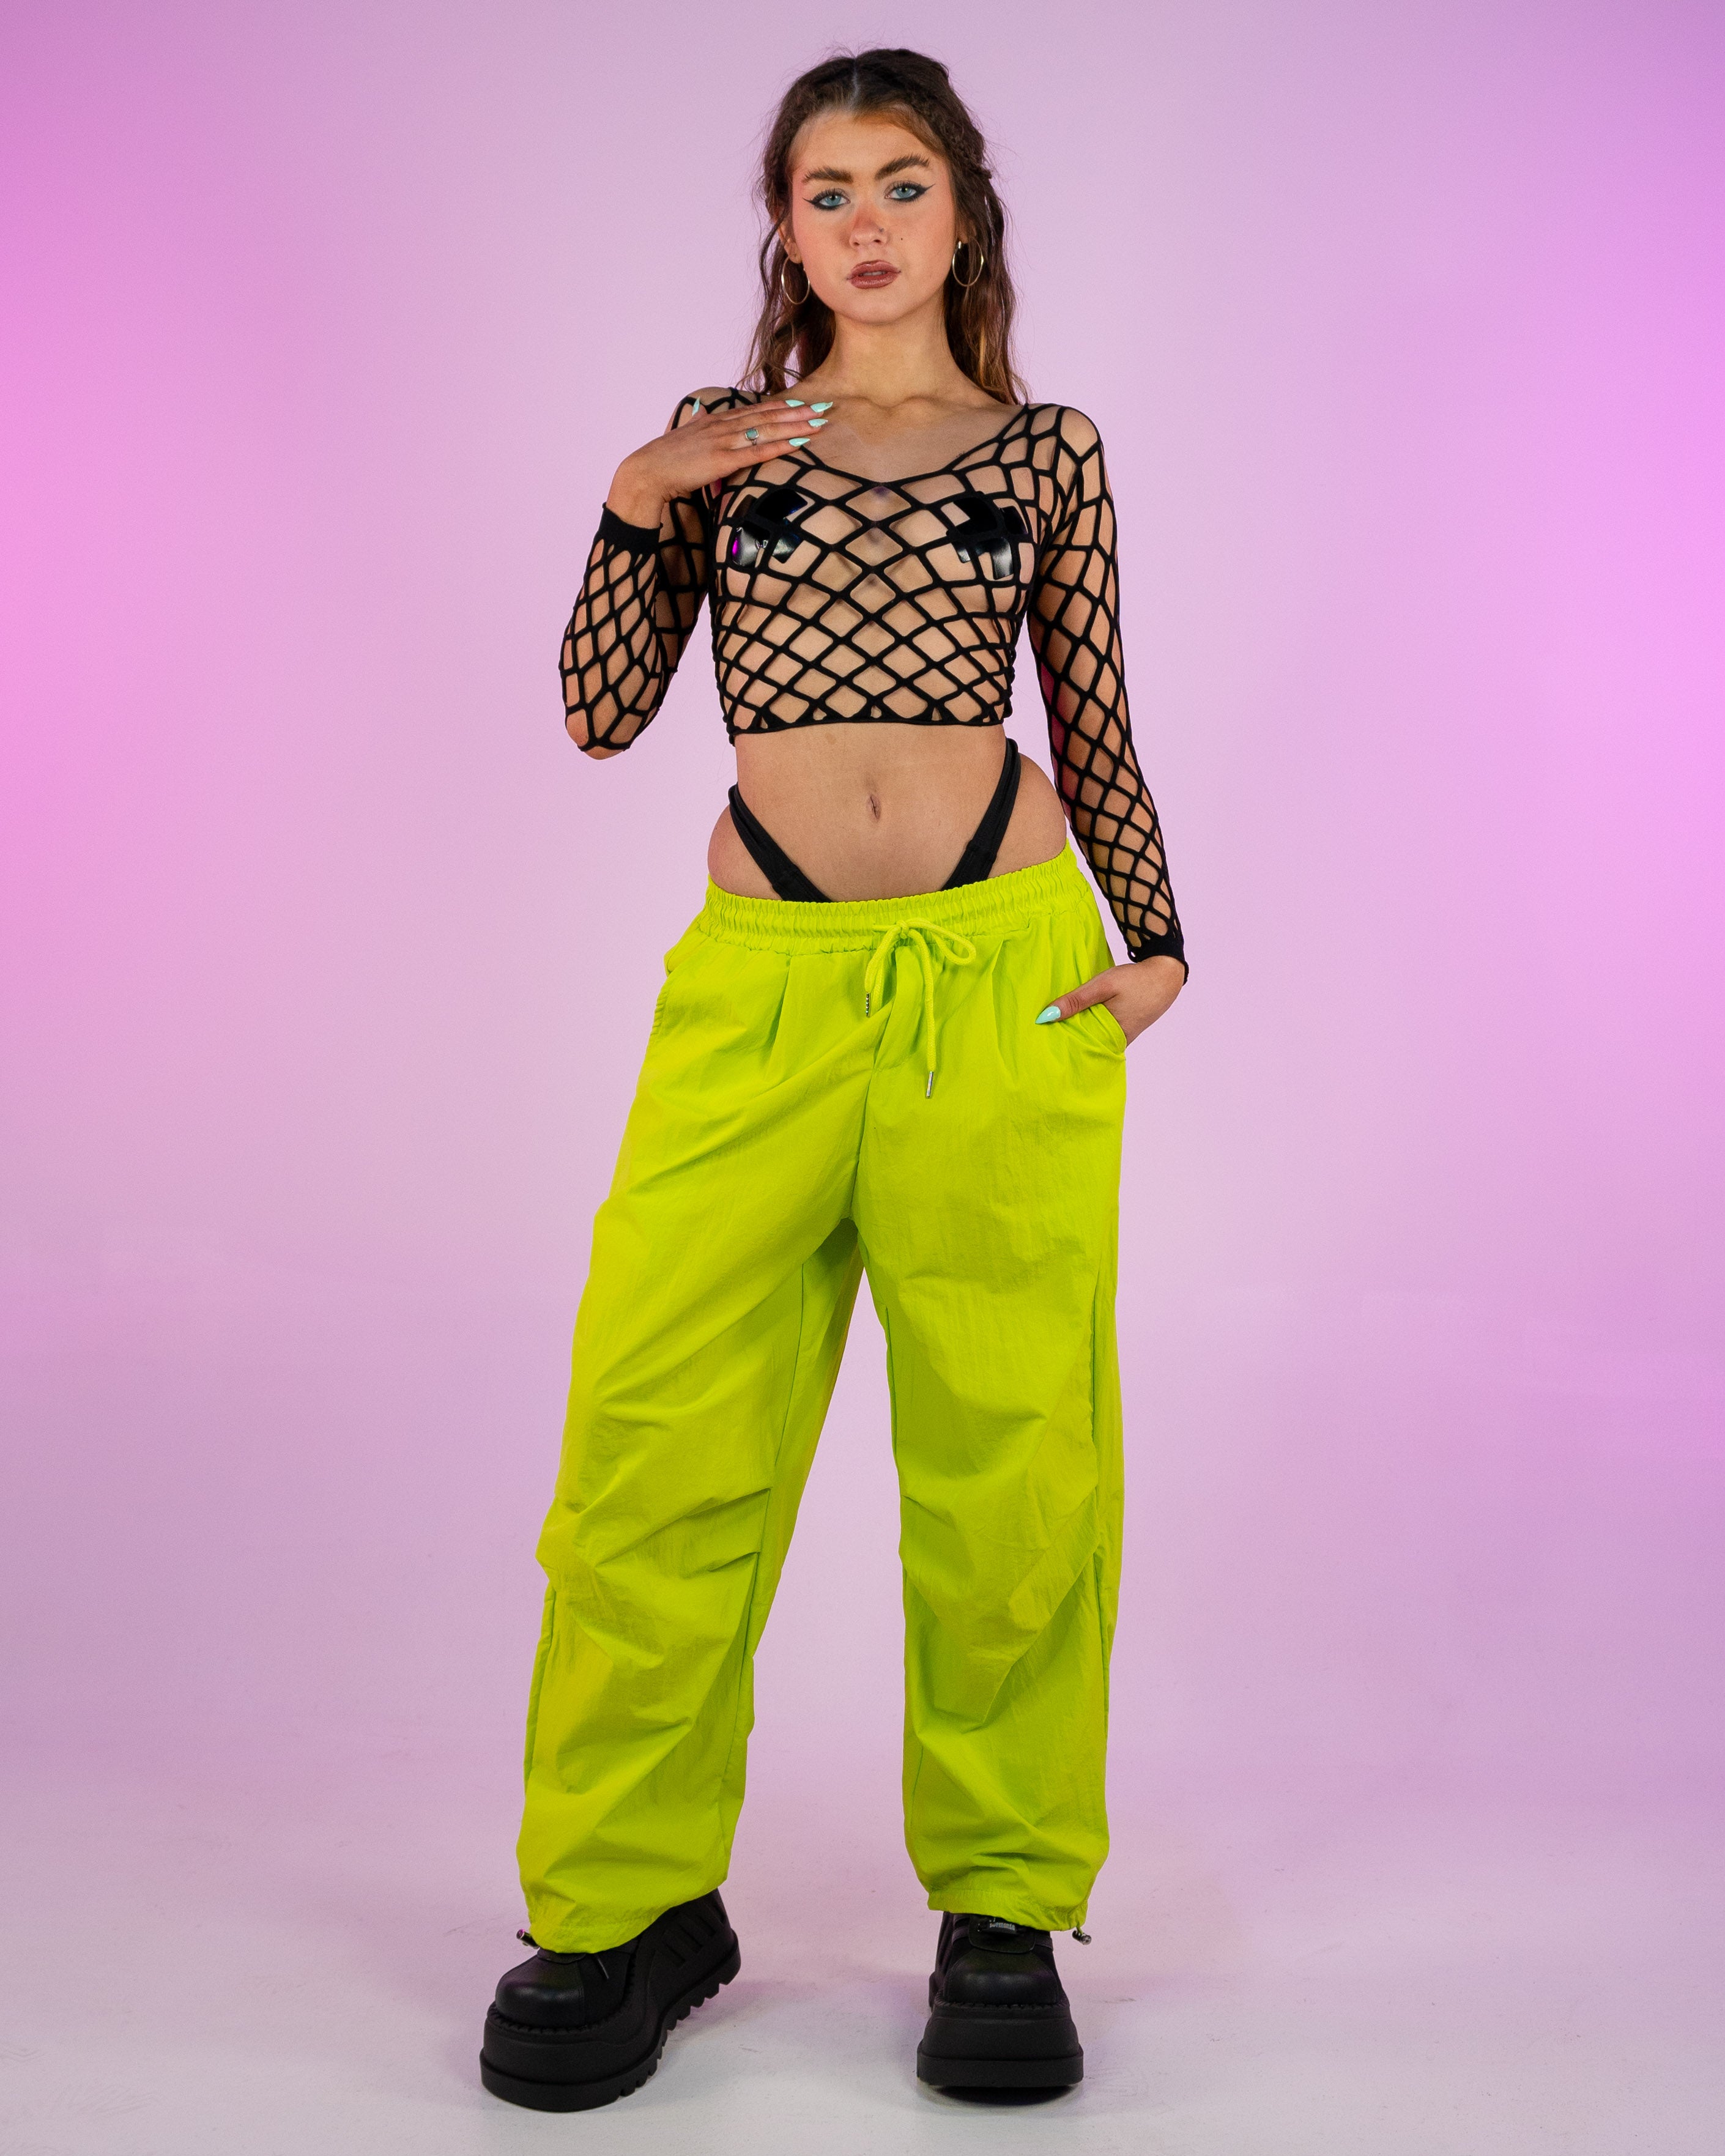 SHEIN SXY Neon Lime Flap Pocket Elastic Waist Pants | Neon green outfits,  Green outfits for women, Lime green outfits